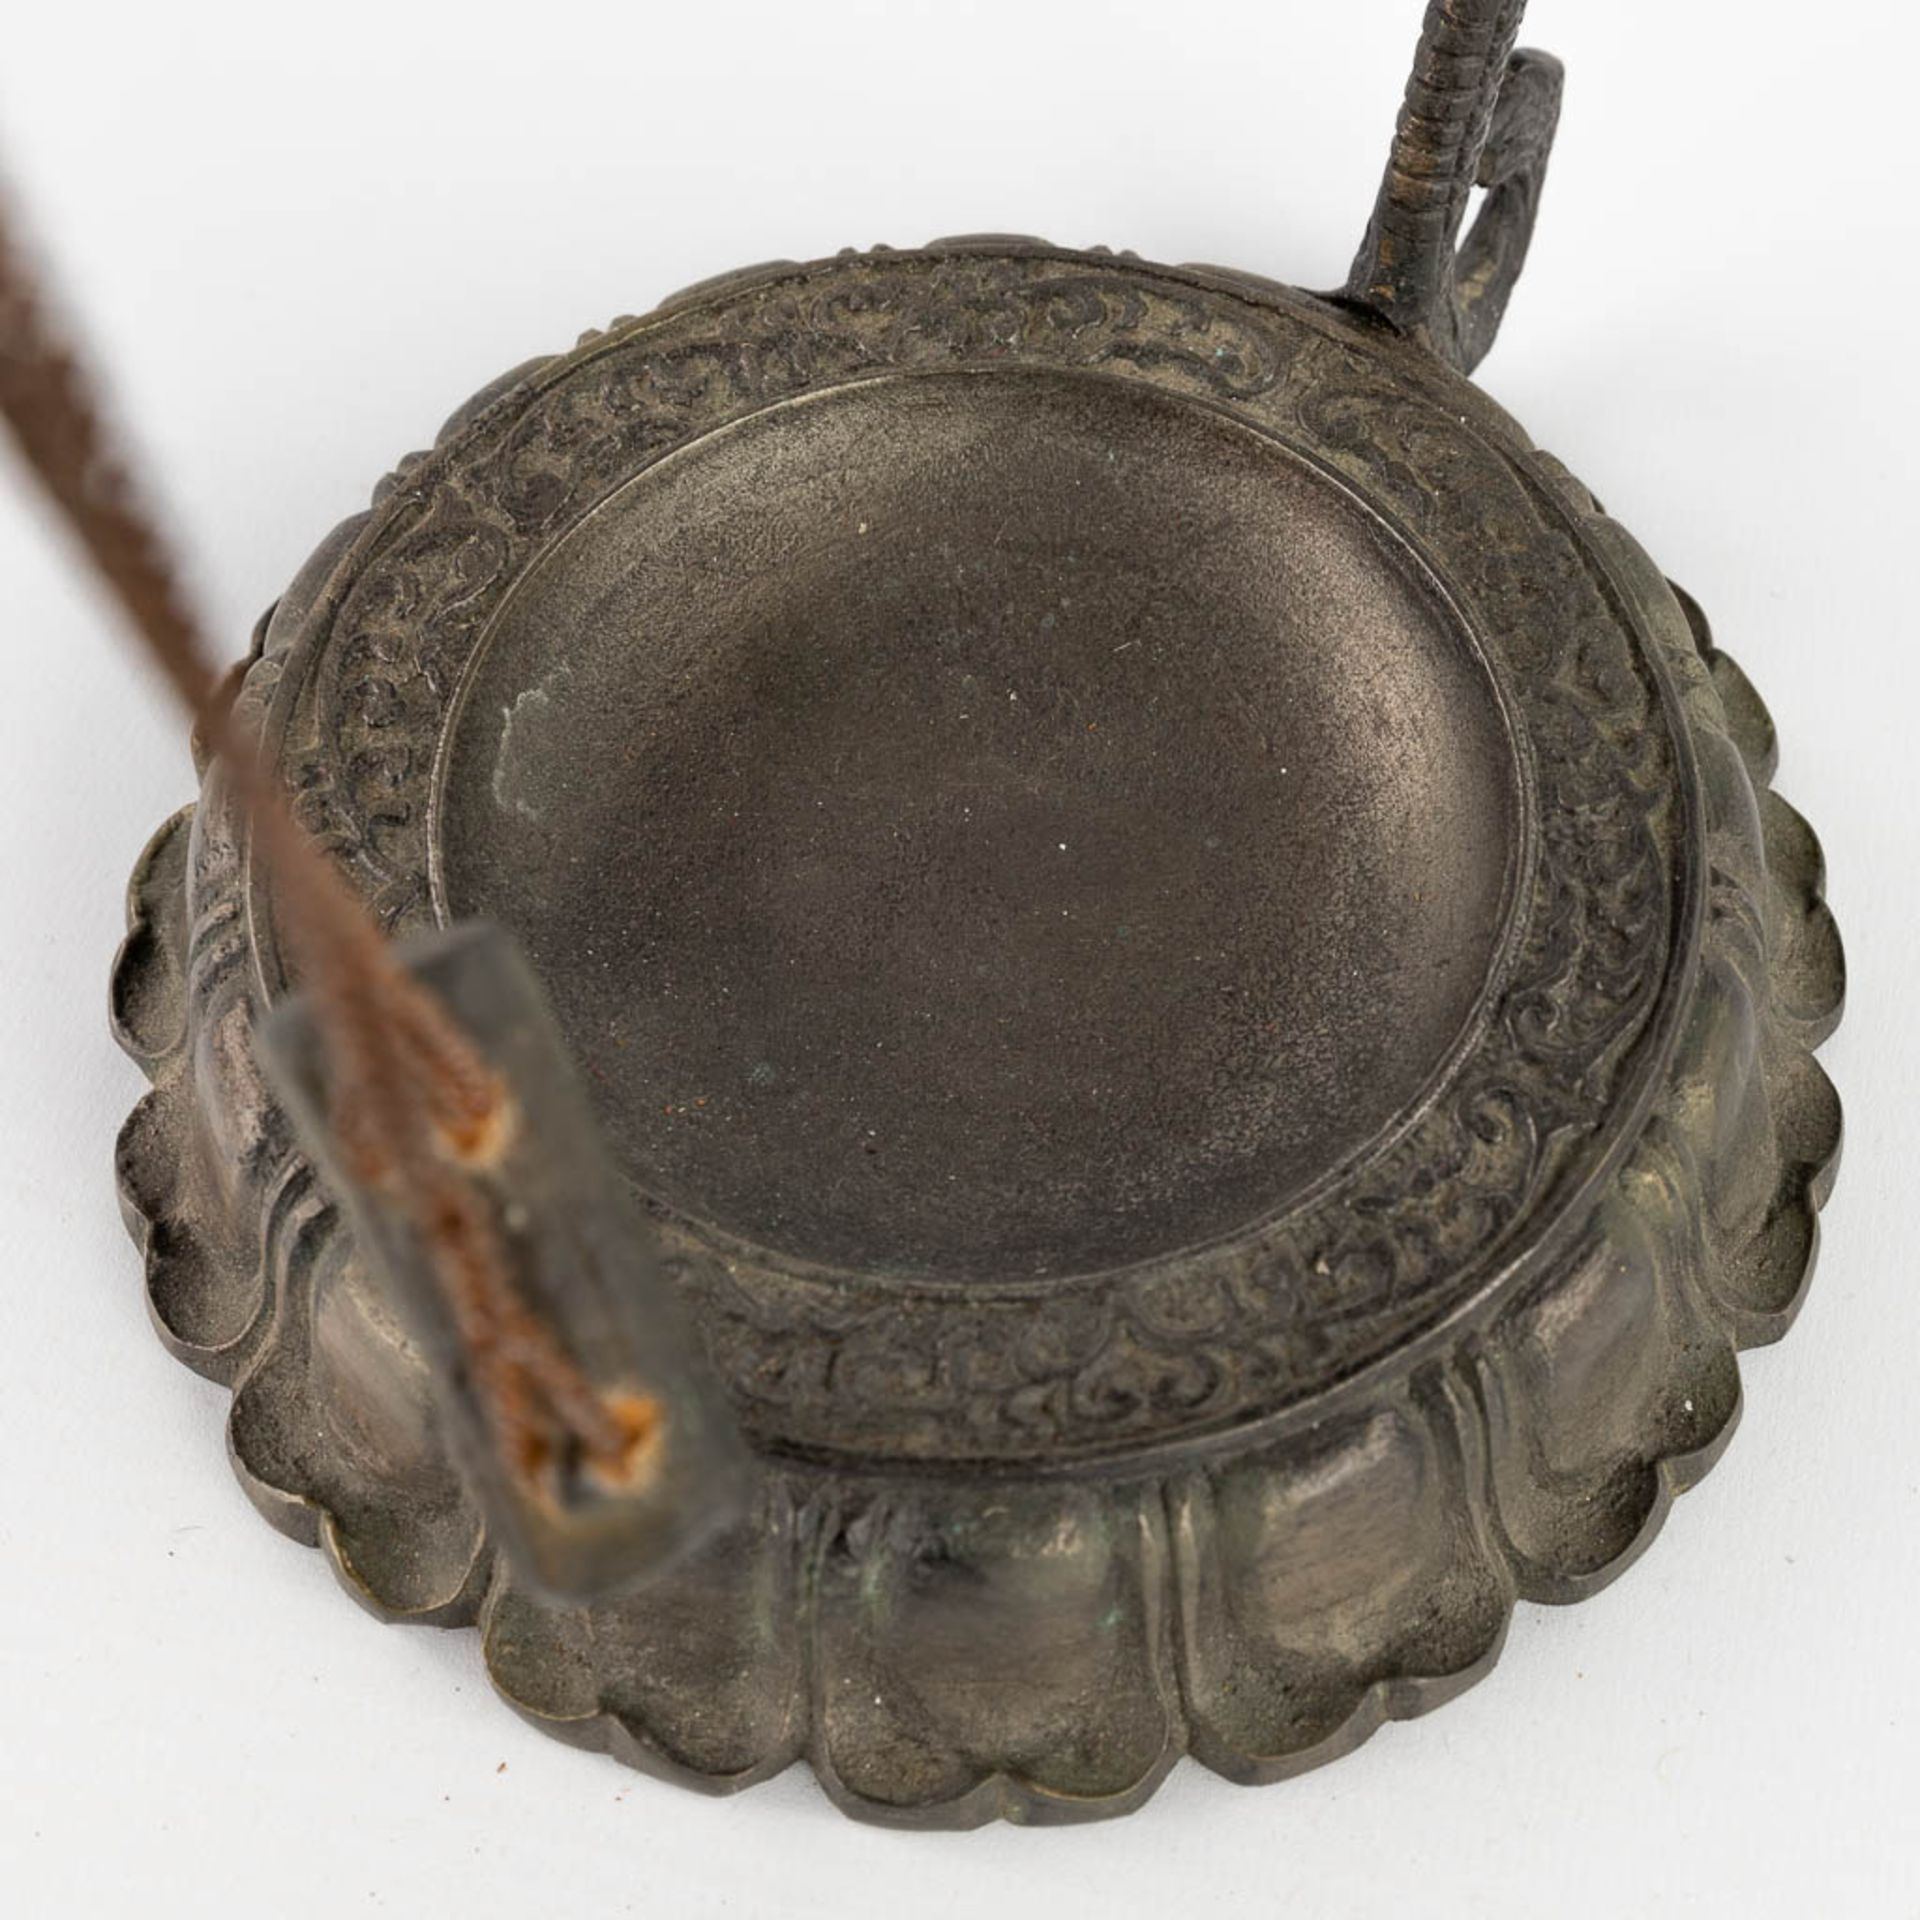 3 bells and a gong, Oriental. 19th/20th C. (L:13 x W:47 x H:55 cm) - Image 17 of 28